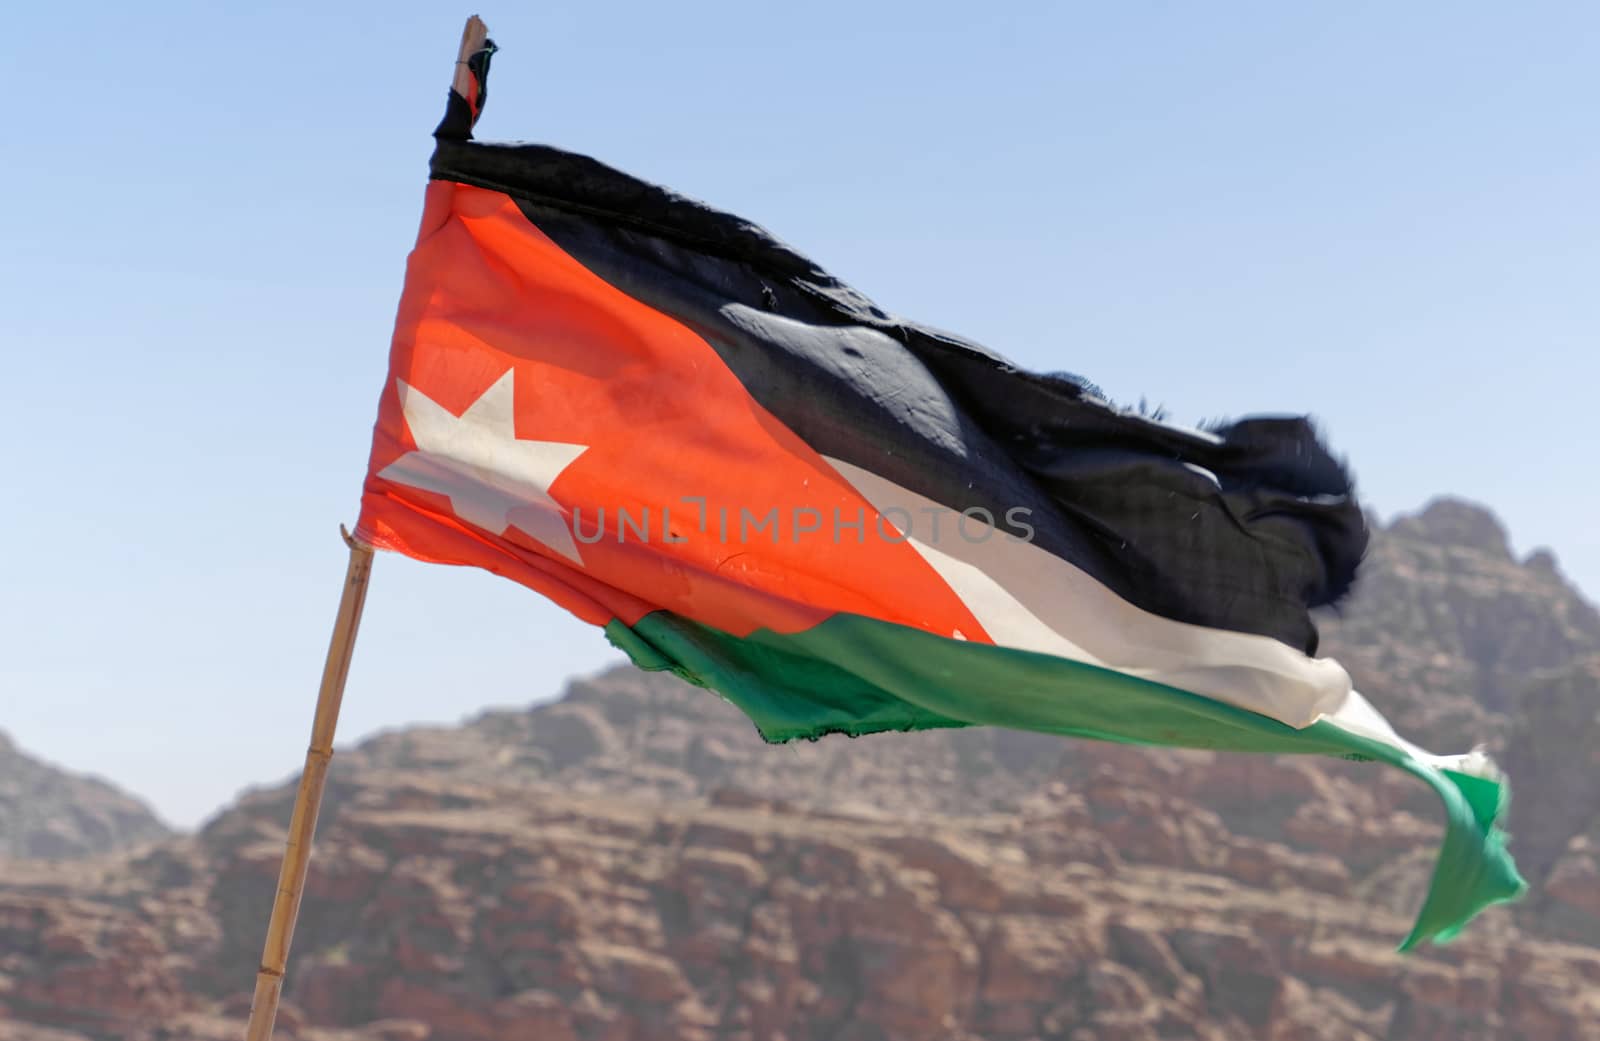 Slightly battered flag of the land Jordan on the high windy cliffs of Petra, Wadi Musa, Jordan, middle east